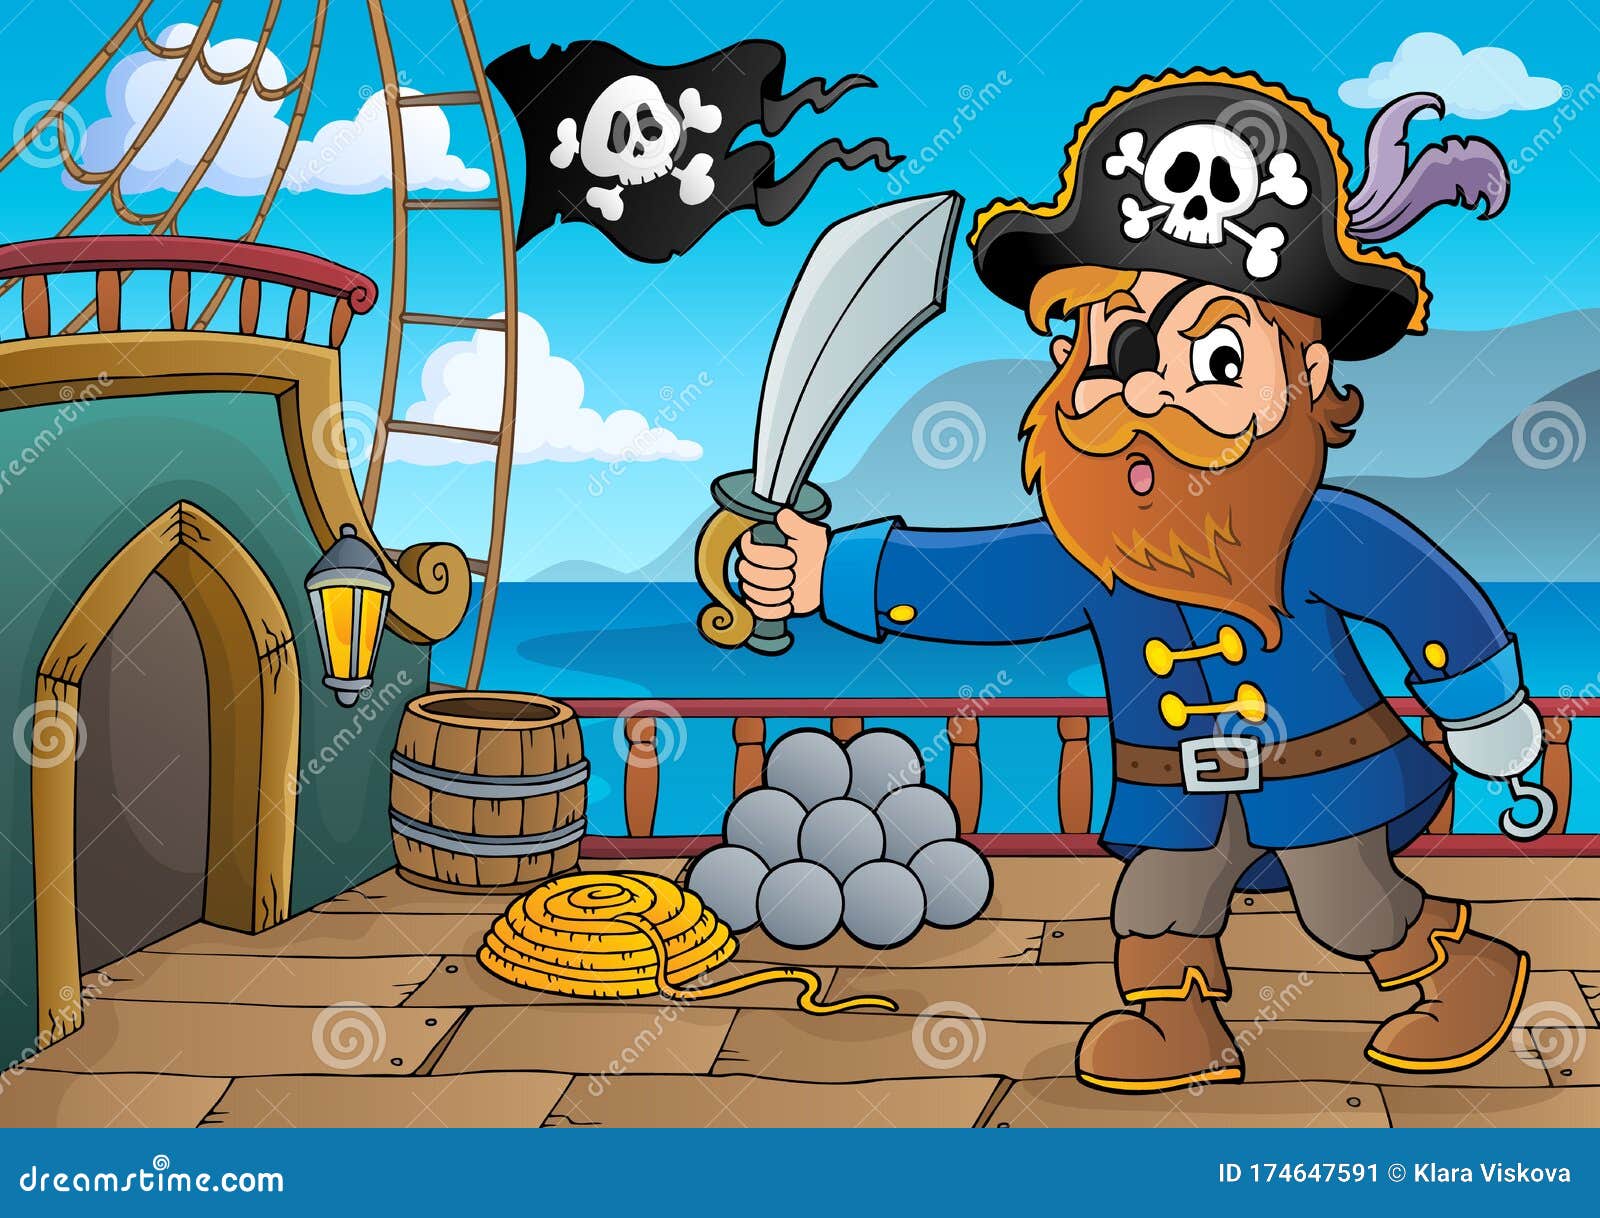 Pirate Holding Sabre Theme 3 Stock Vector - Illustration of eps10 ...